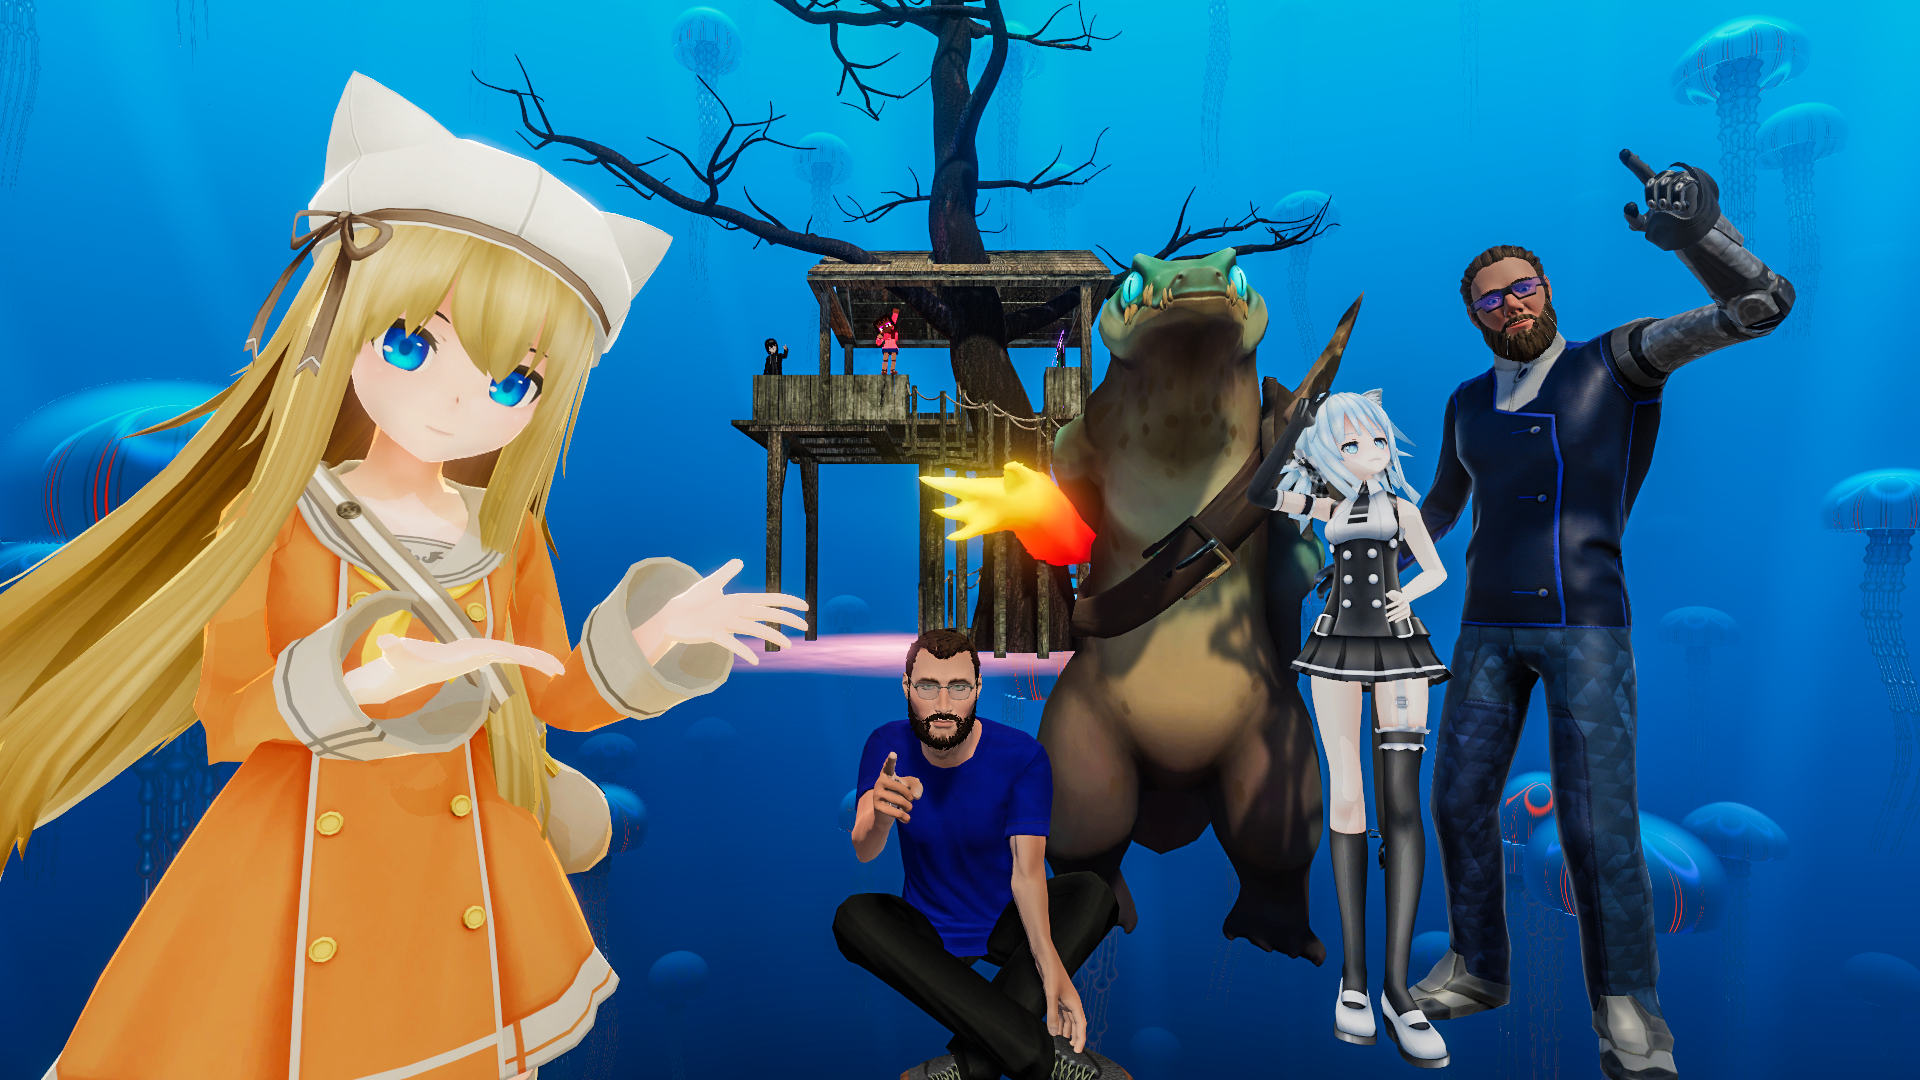 Images of avatars used in VRChat on a blue backdrop